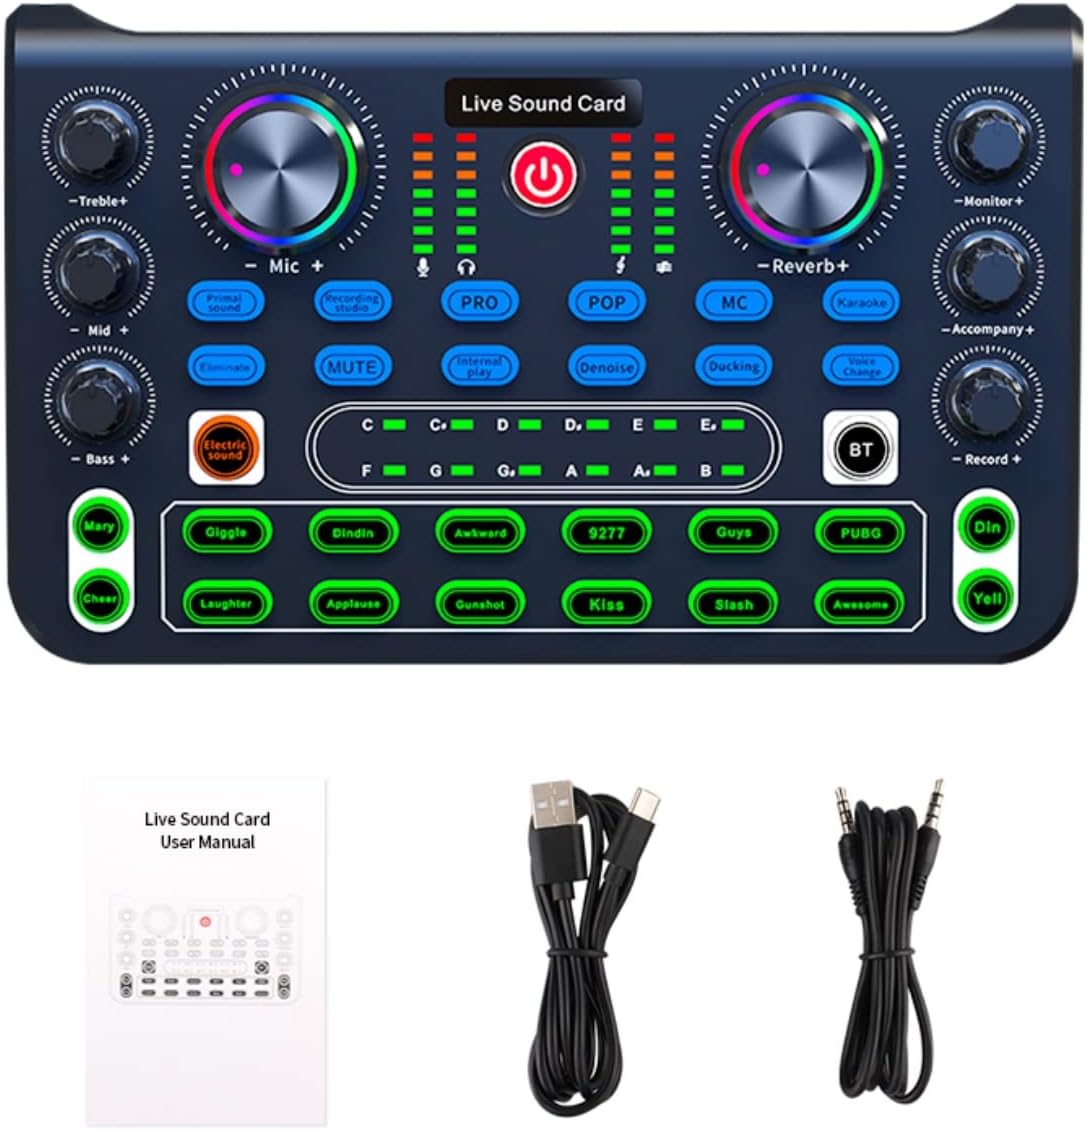 X60 Podcast Recording Equipment with Podcast Mixer,Voice Changer for Voice Chat and Cool Lights,Sound Card,DJ Audio Mixer Interface for Live Streaming Brand: SIBORIE